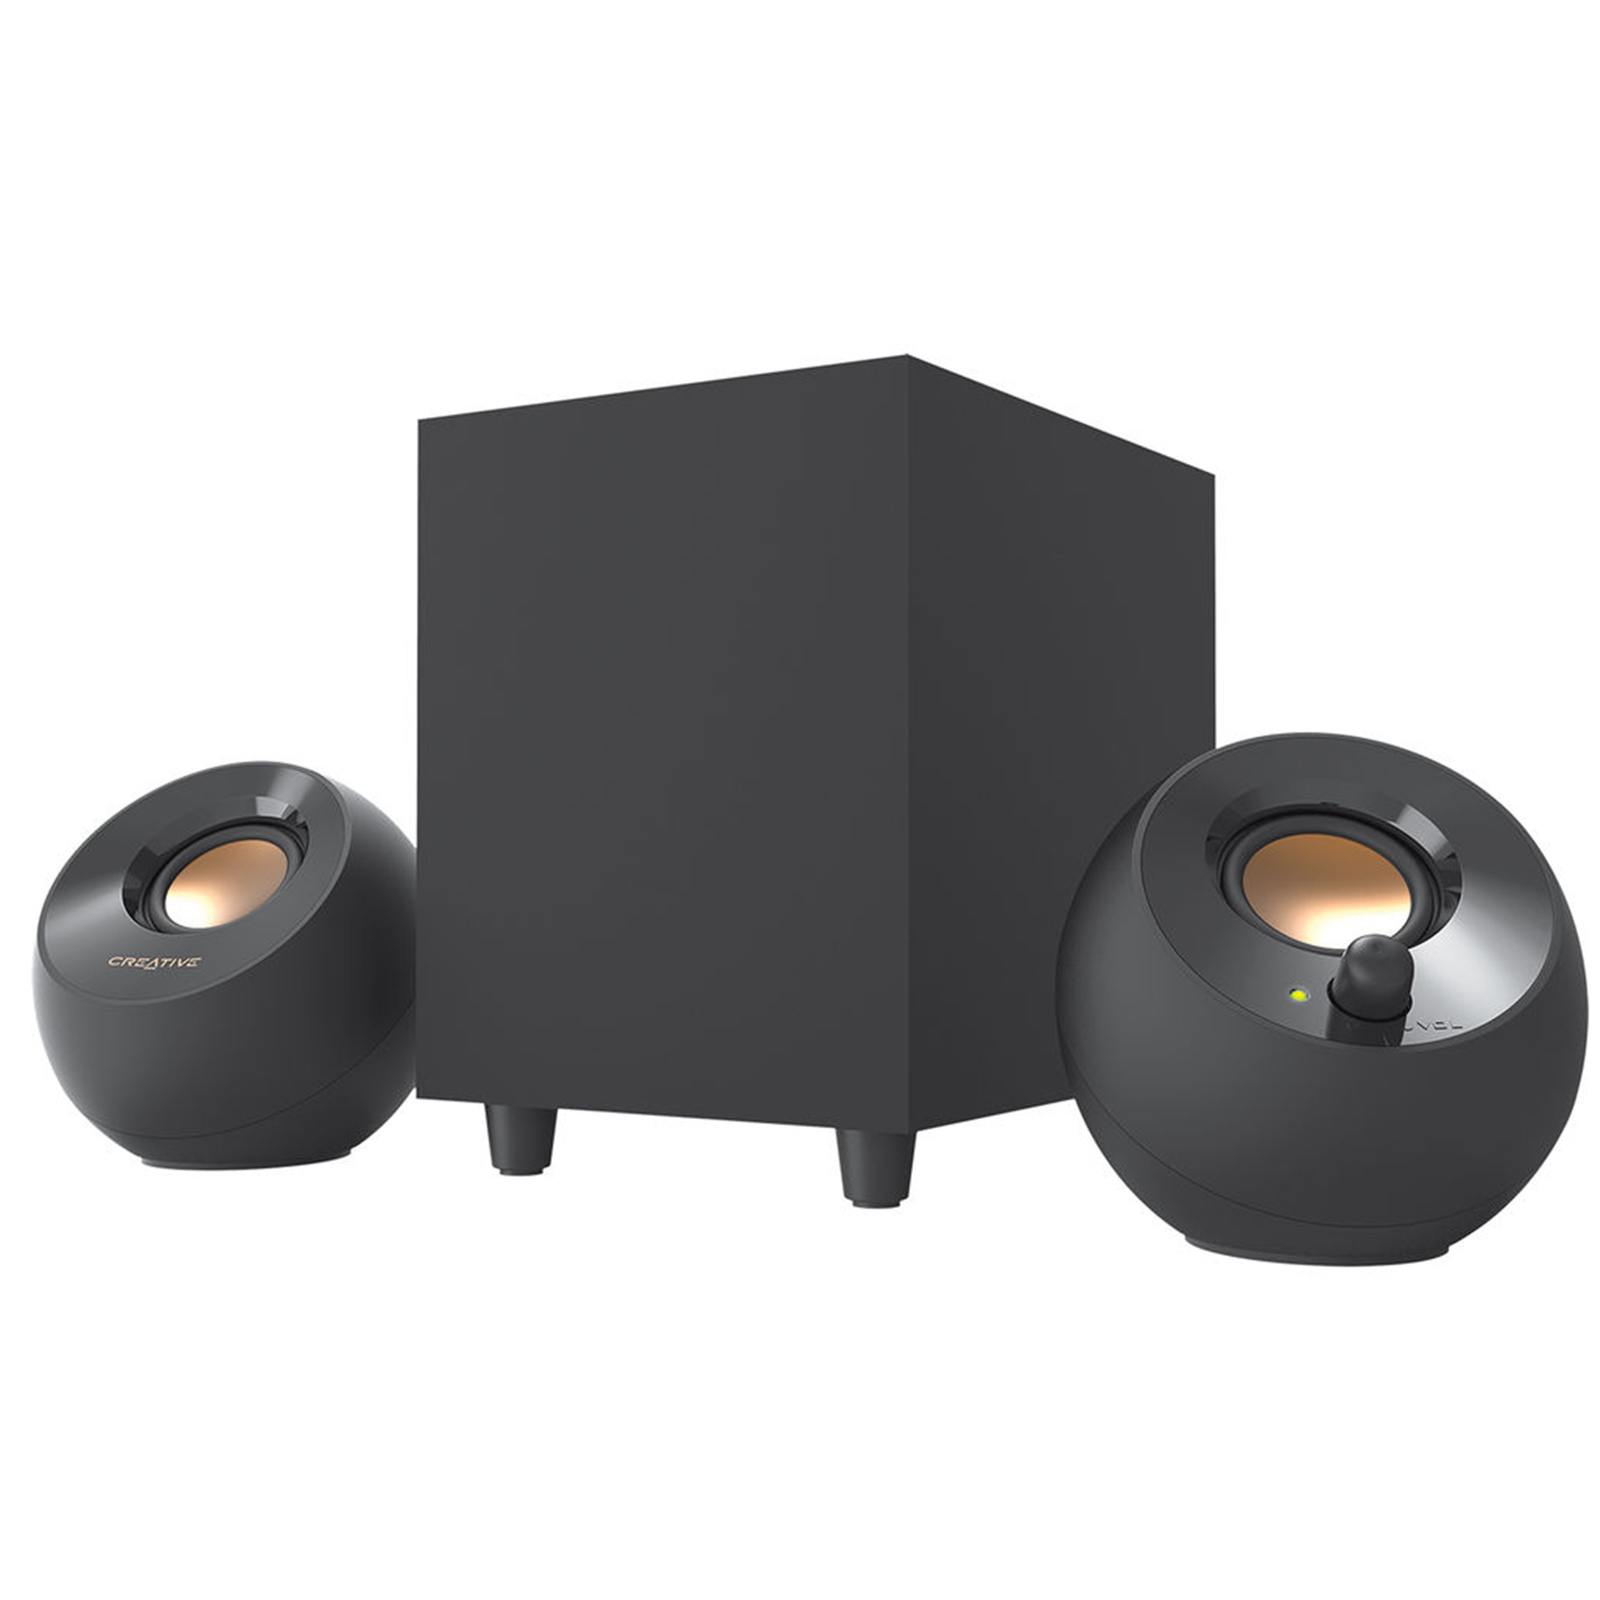 Buy the Creative Pebble Plus 2.1 USB-Powered Desktop Speakers with  Subwoofer -... ( 51MF0480AA000 ) online - PBTech.com/au